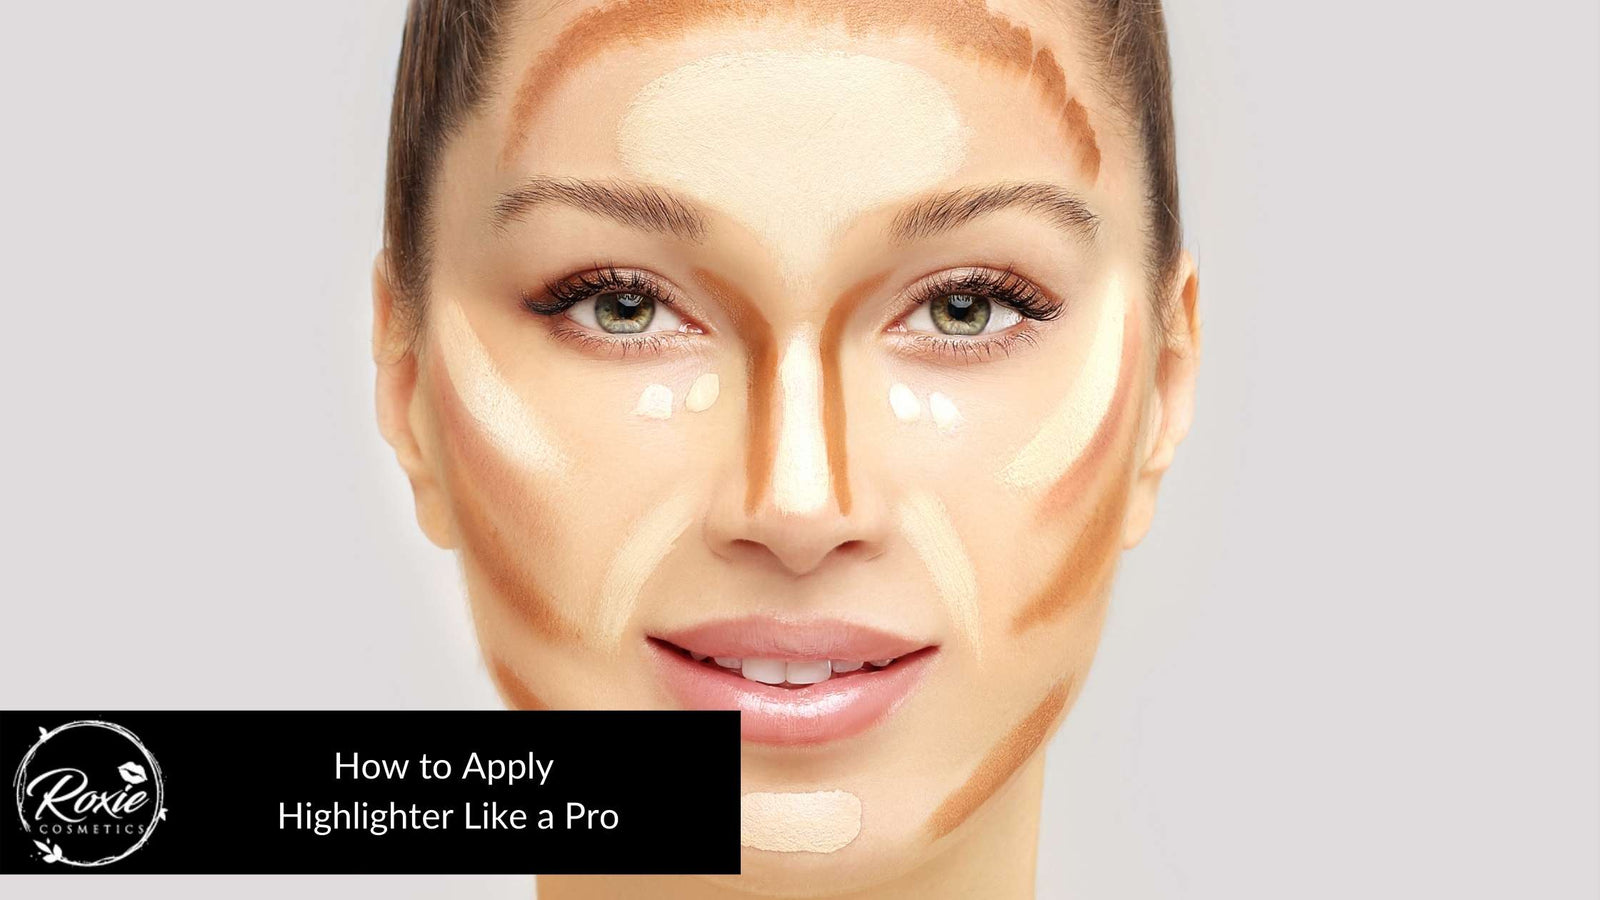 How to Apply Highlighter Like a Pro: Easy Steps to Highlight like